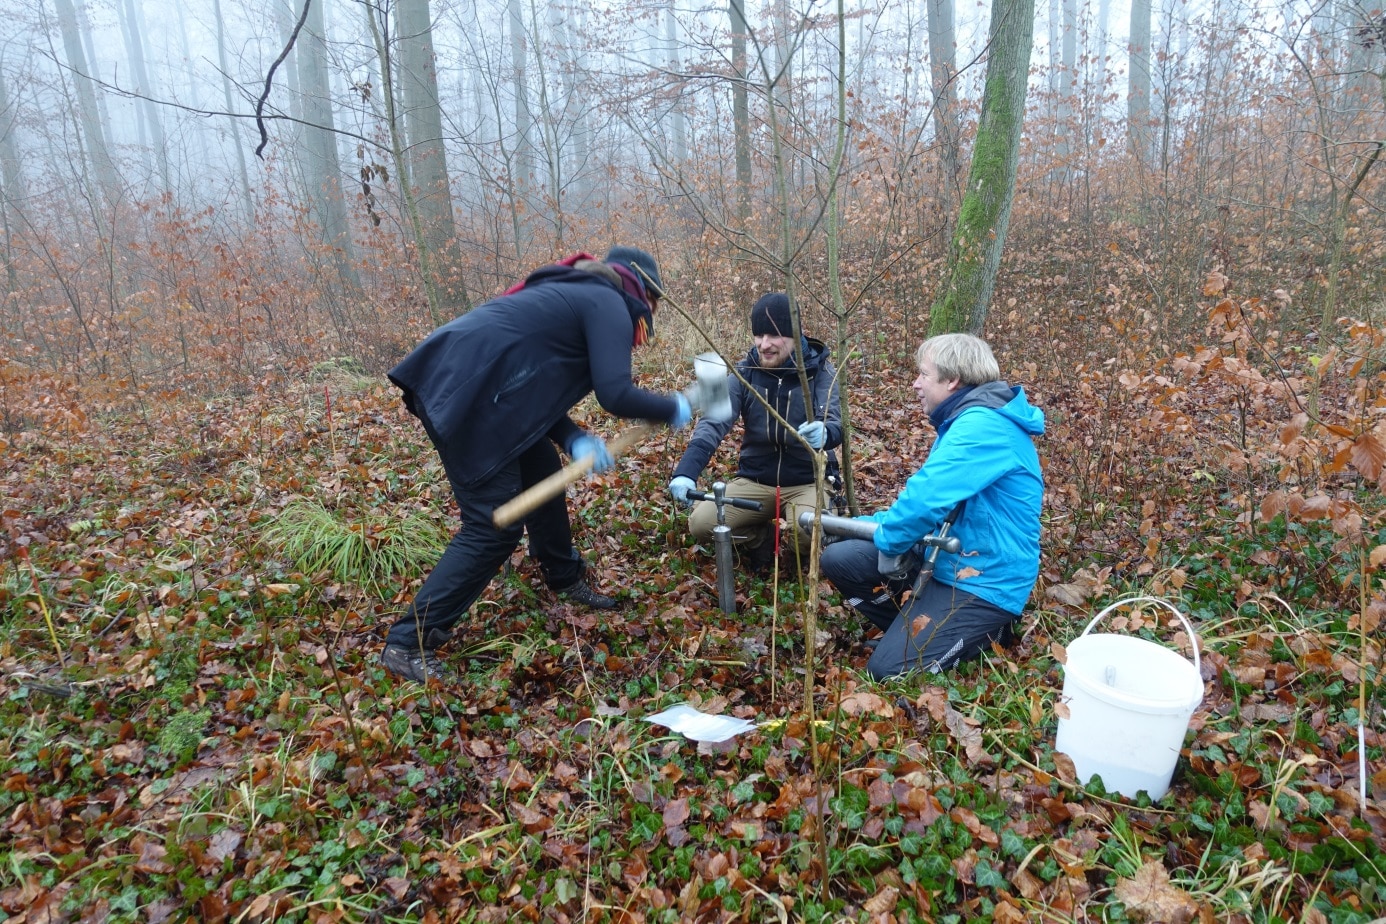 Picture: The photo shows a young female scientist and two young male scientists taking soil samples in a foggy winter forest. The woman is hitting the impact head of an earth drill stick with a polyamide hammer to drive it into the ground. One of the men is kneeling behind the drill stick, holding it with one hand by one of the two handles. The other man is kneeling next to it, holding another drill stick on his knees. Next to him is a white plastic bucket.